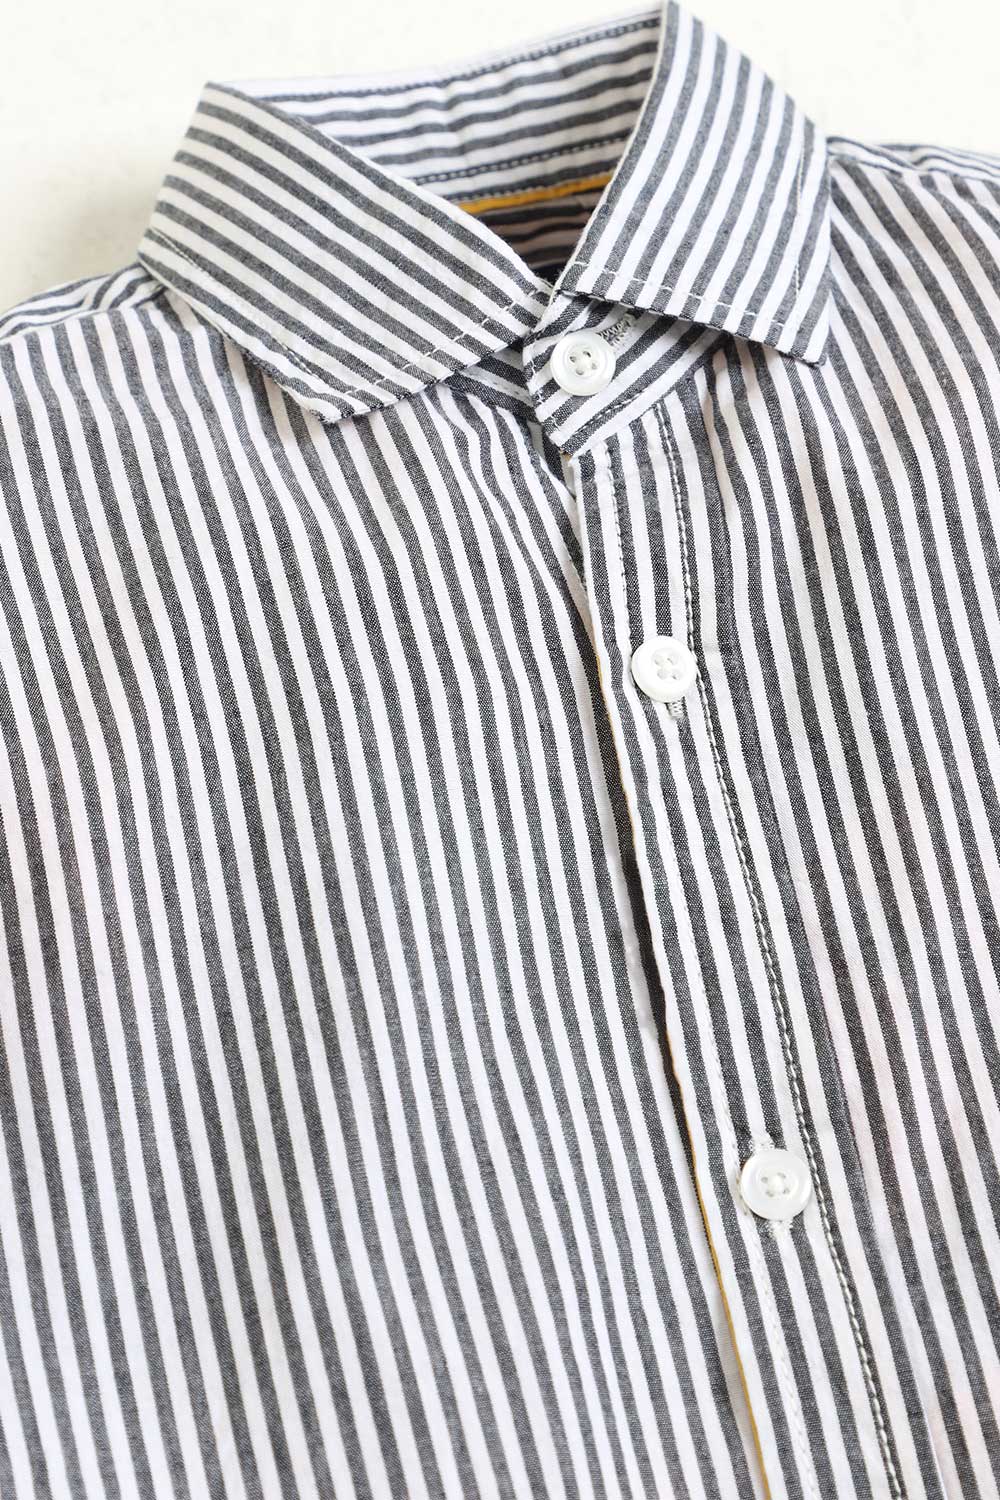 Hope Not Out by Shahid Afridi Boys Casual Shirt Boys Grey Lining Casual Shirt